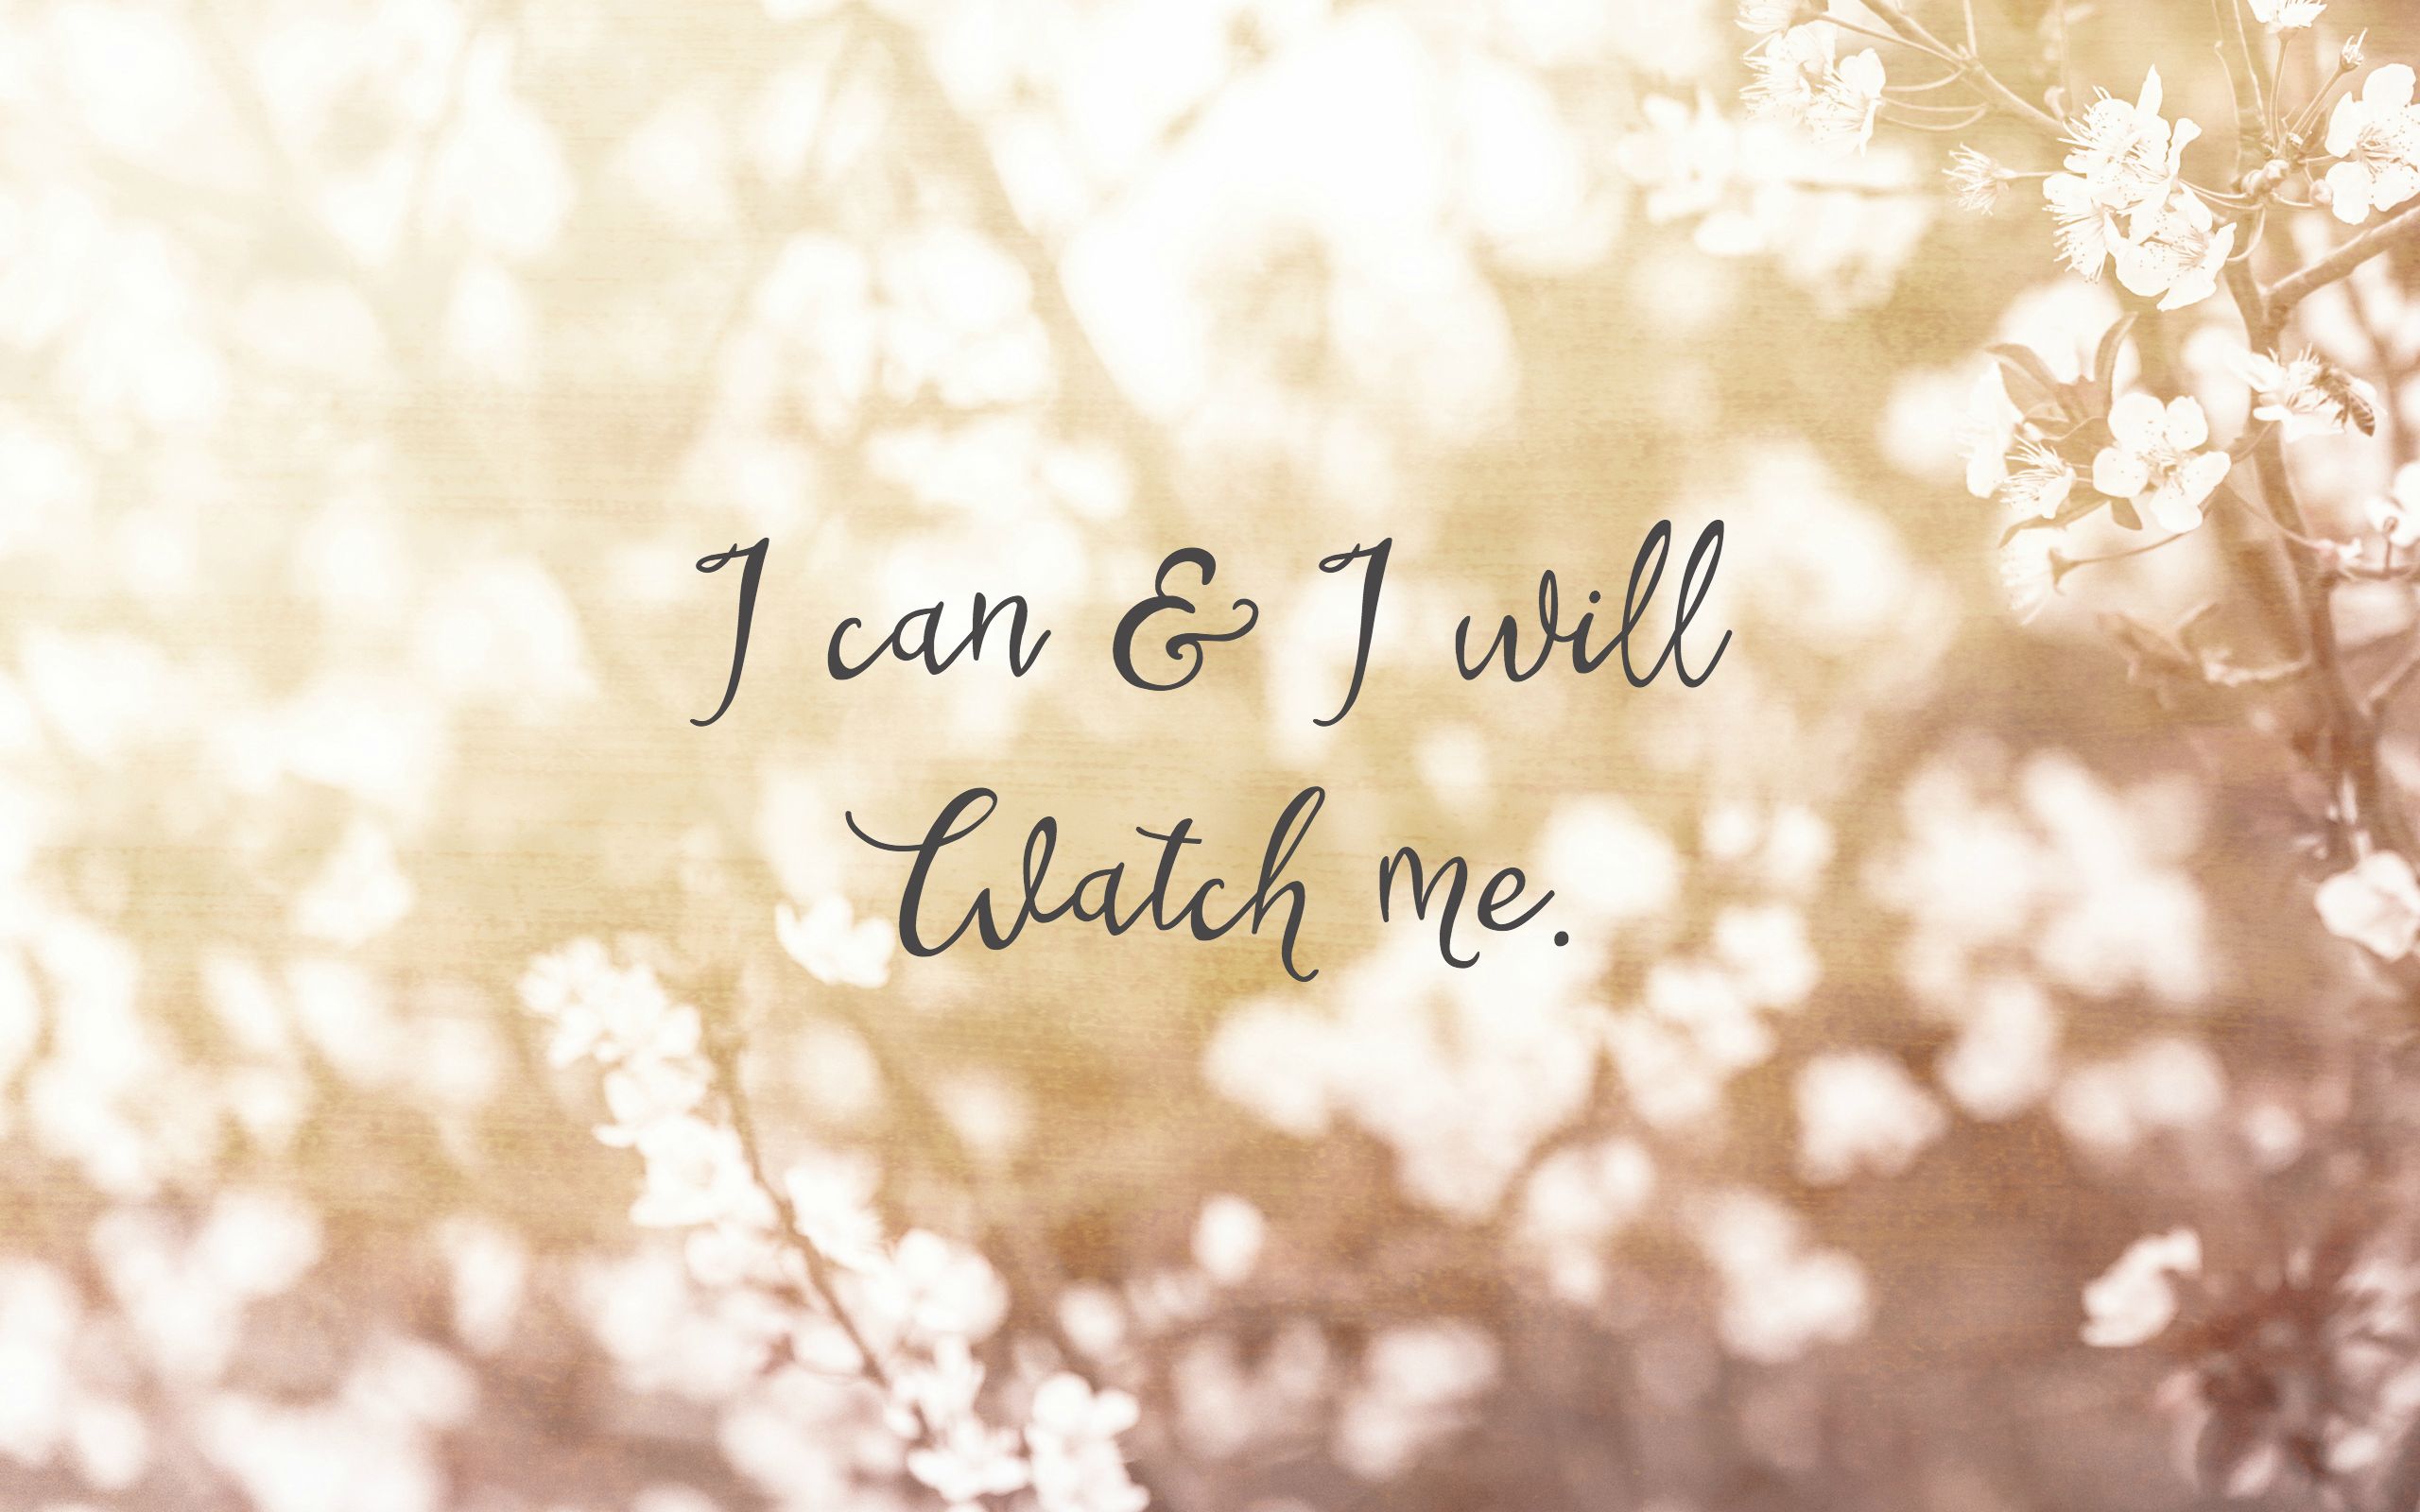 Desktop Wallpaper Quotes I Can And I Will Watch Me